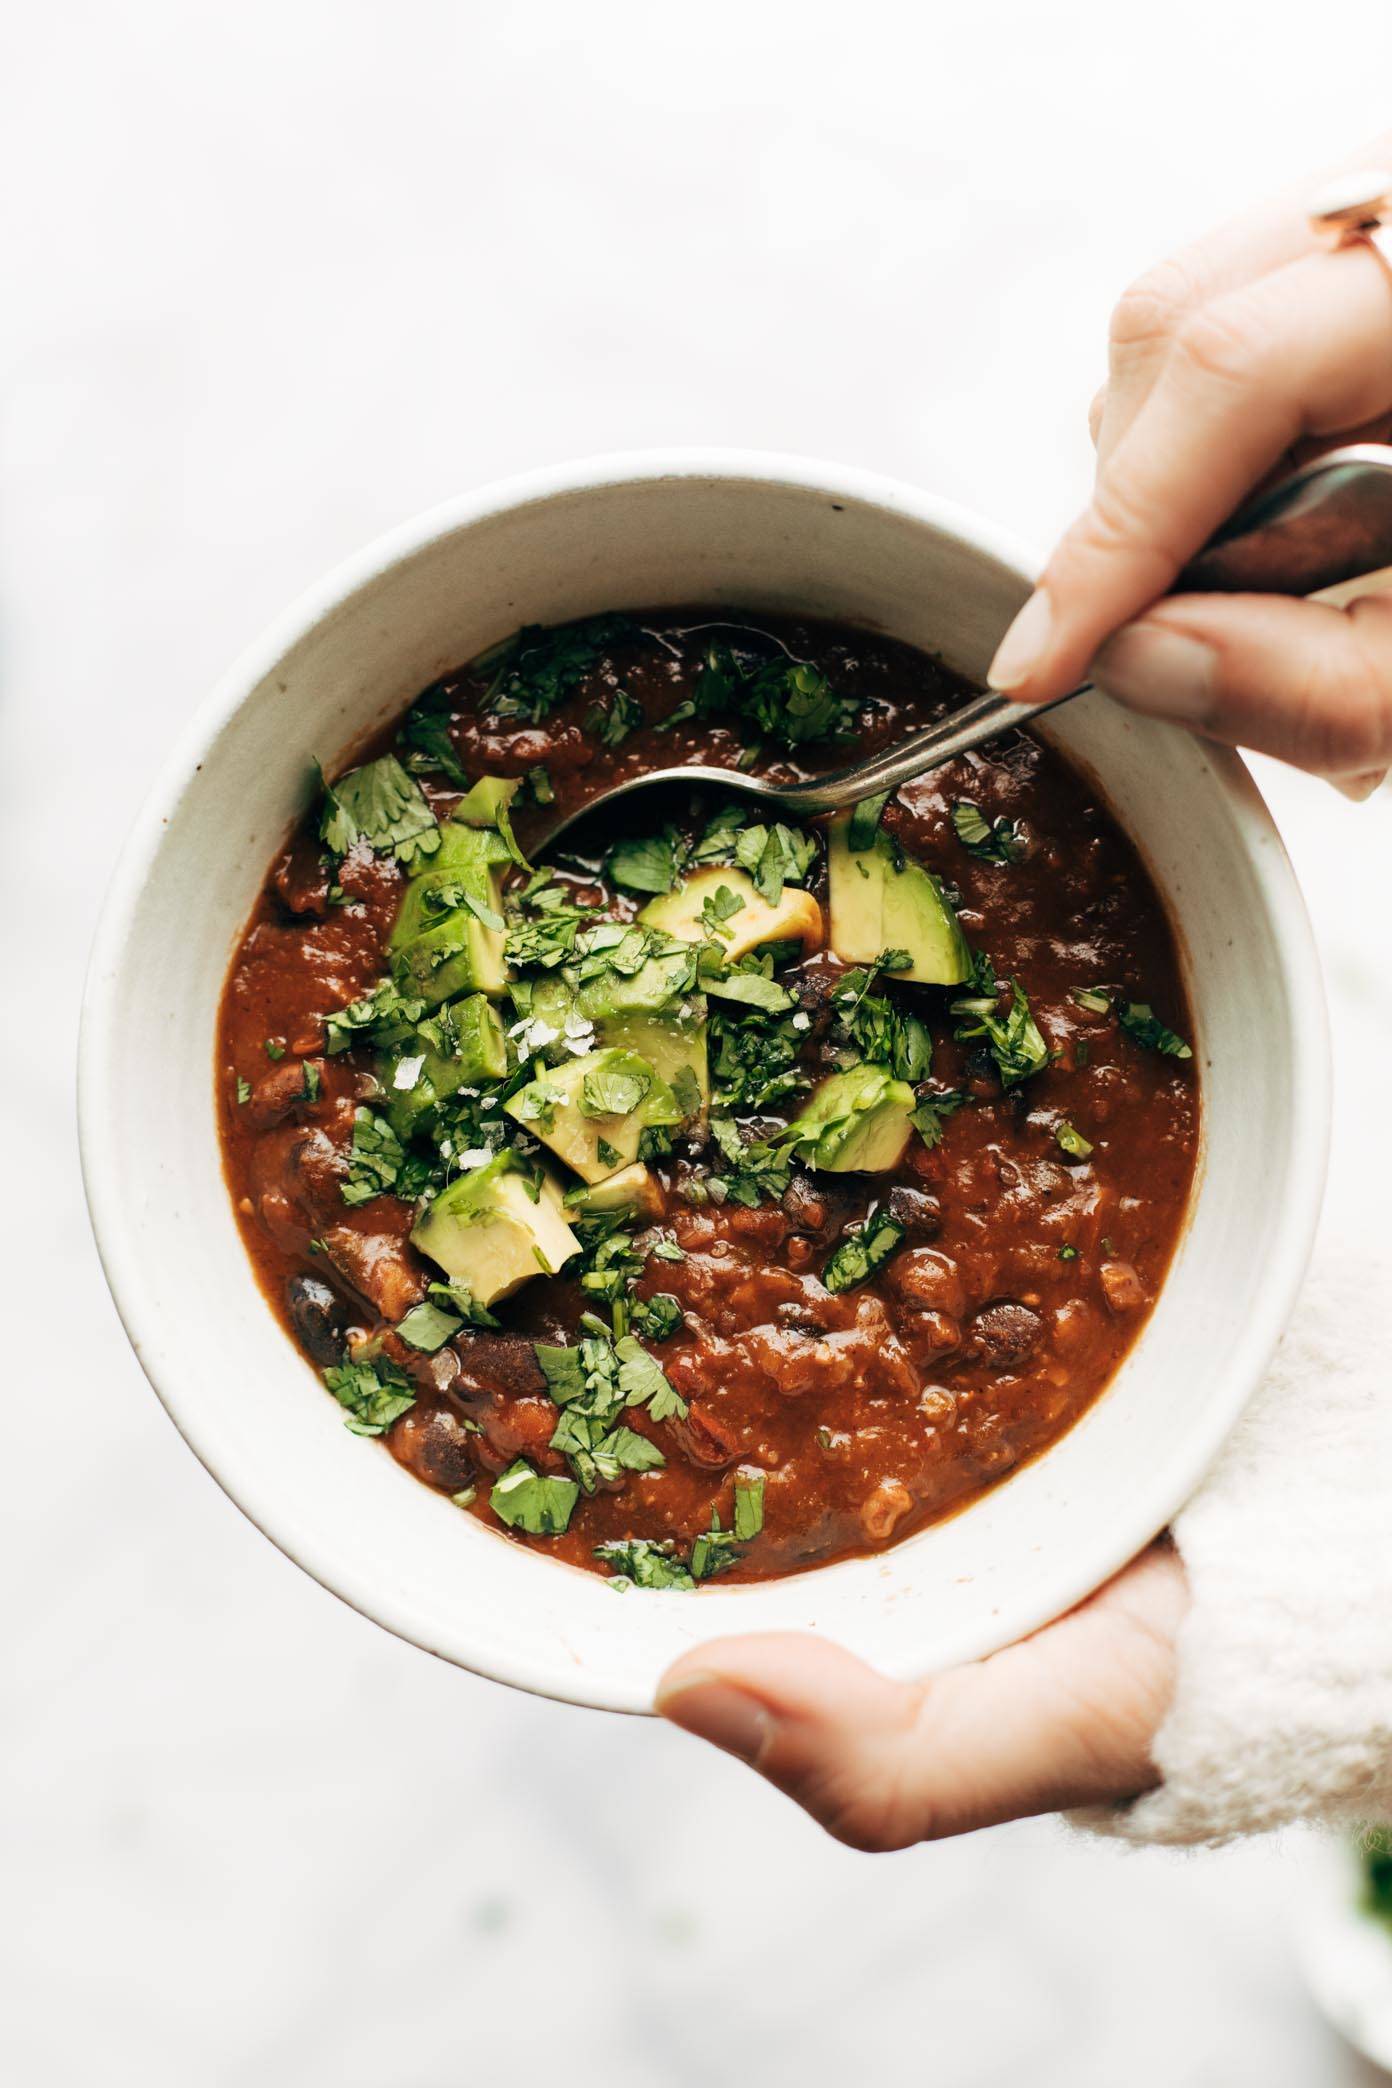 Hands holding a bowl of vegan instant pot chili.